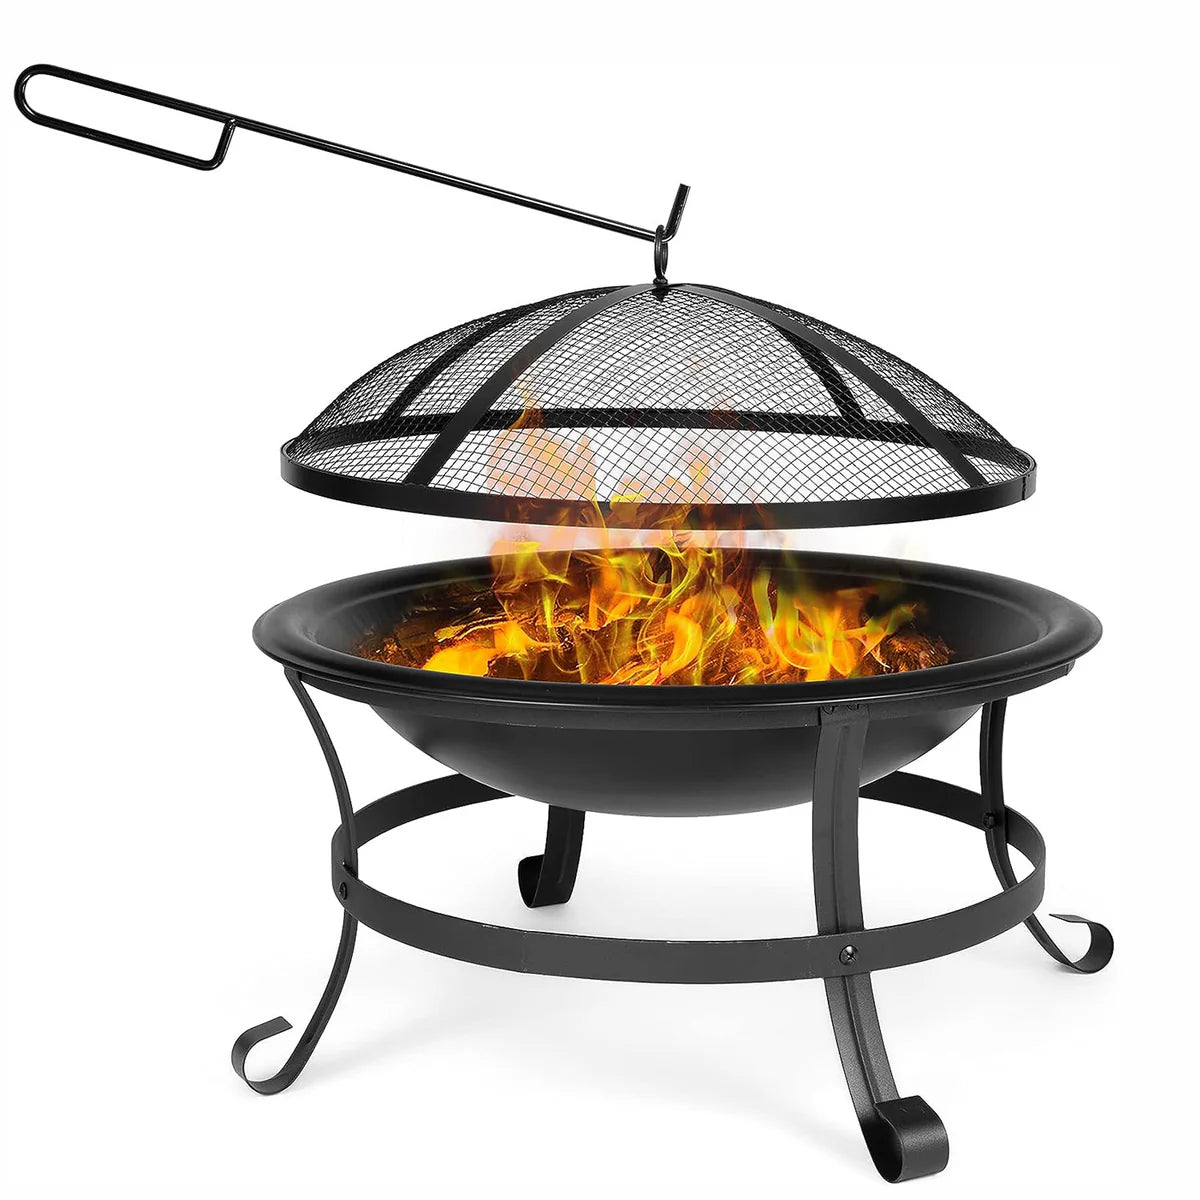 22" Round Outdoor Fire Pits Patio Garden Fireplace BBQ Grill with Spark Mesh Cover